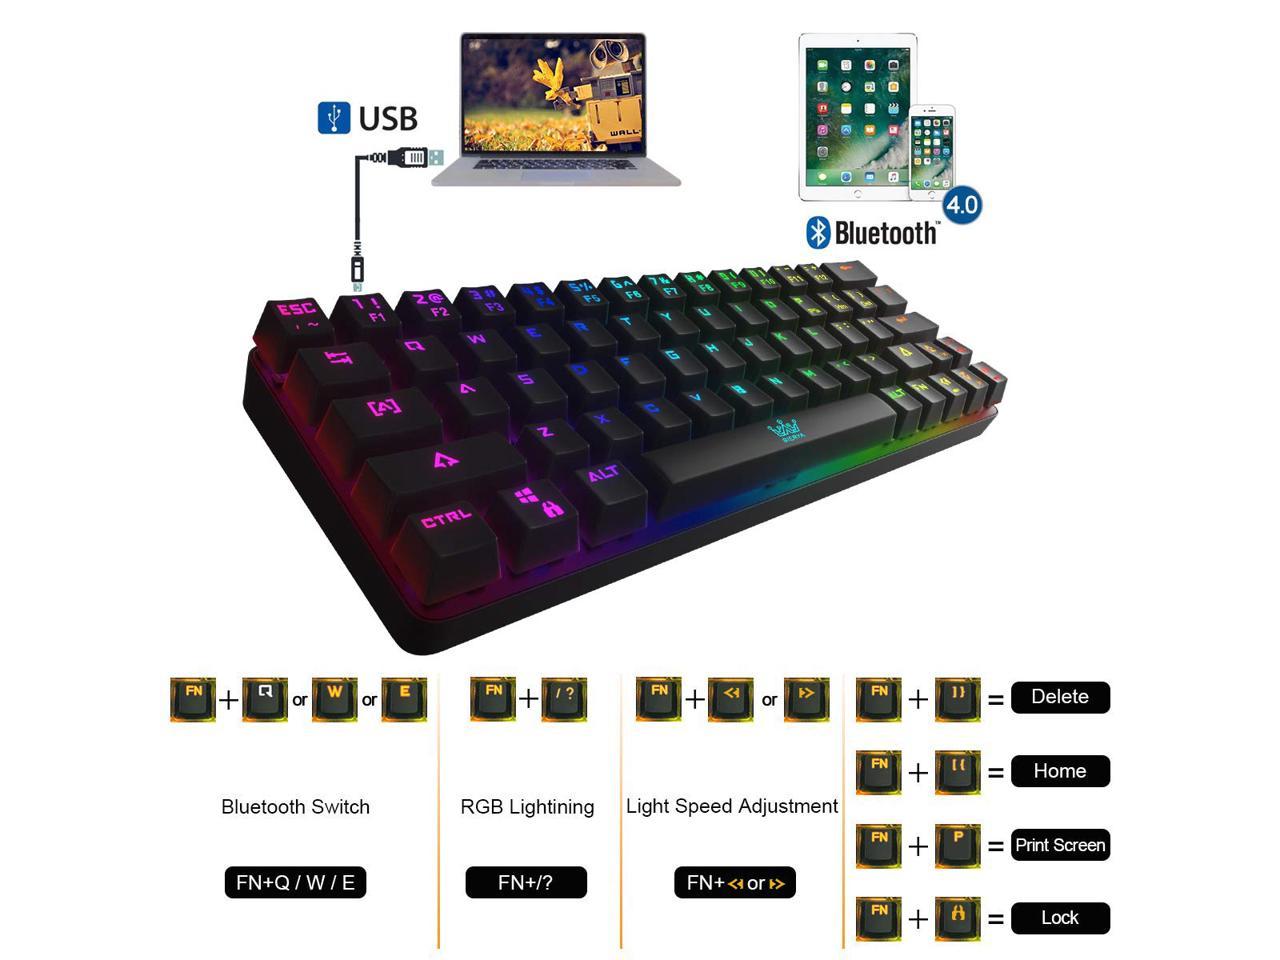 63 Keys Compact RGB Backlit Gaming keyboard with 1900 mAh,Full Anti-ghosting Keys for Gamers and Typists Red Switch DIERYA 60% Mechanical Keyboard,Bluetooth 4.0 Wired/Wireless keyboard